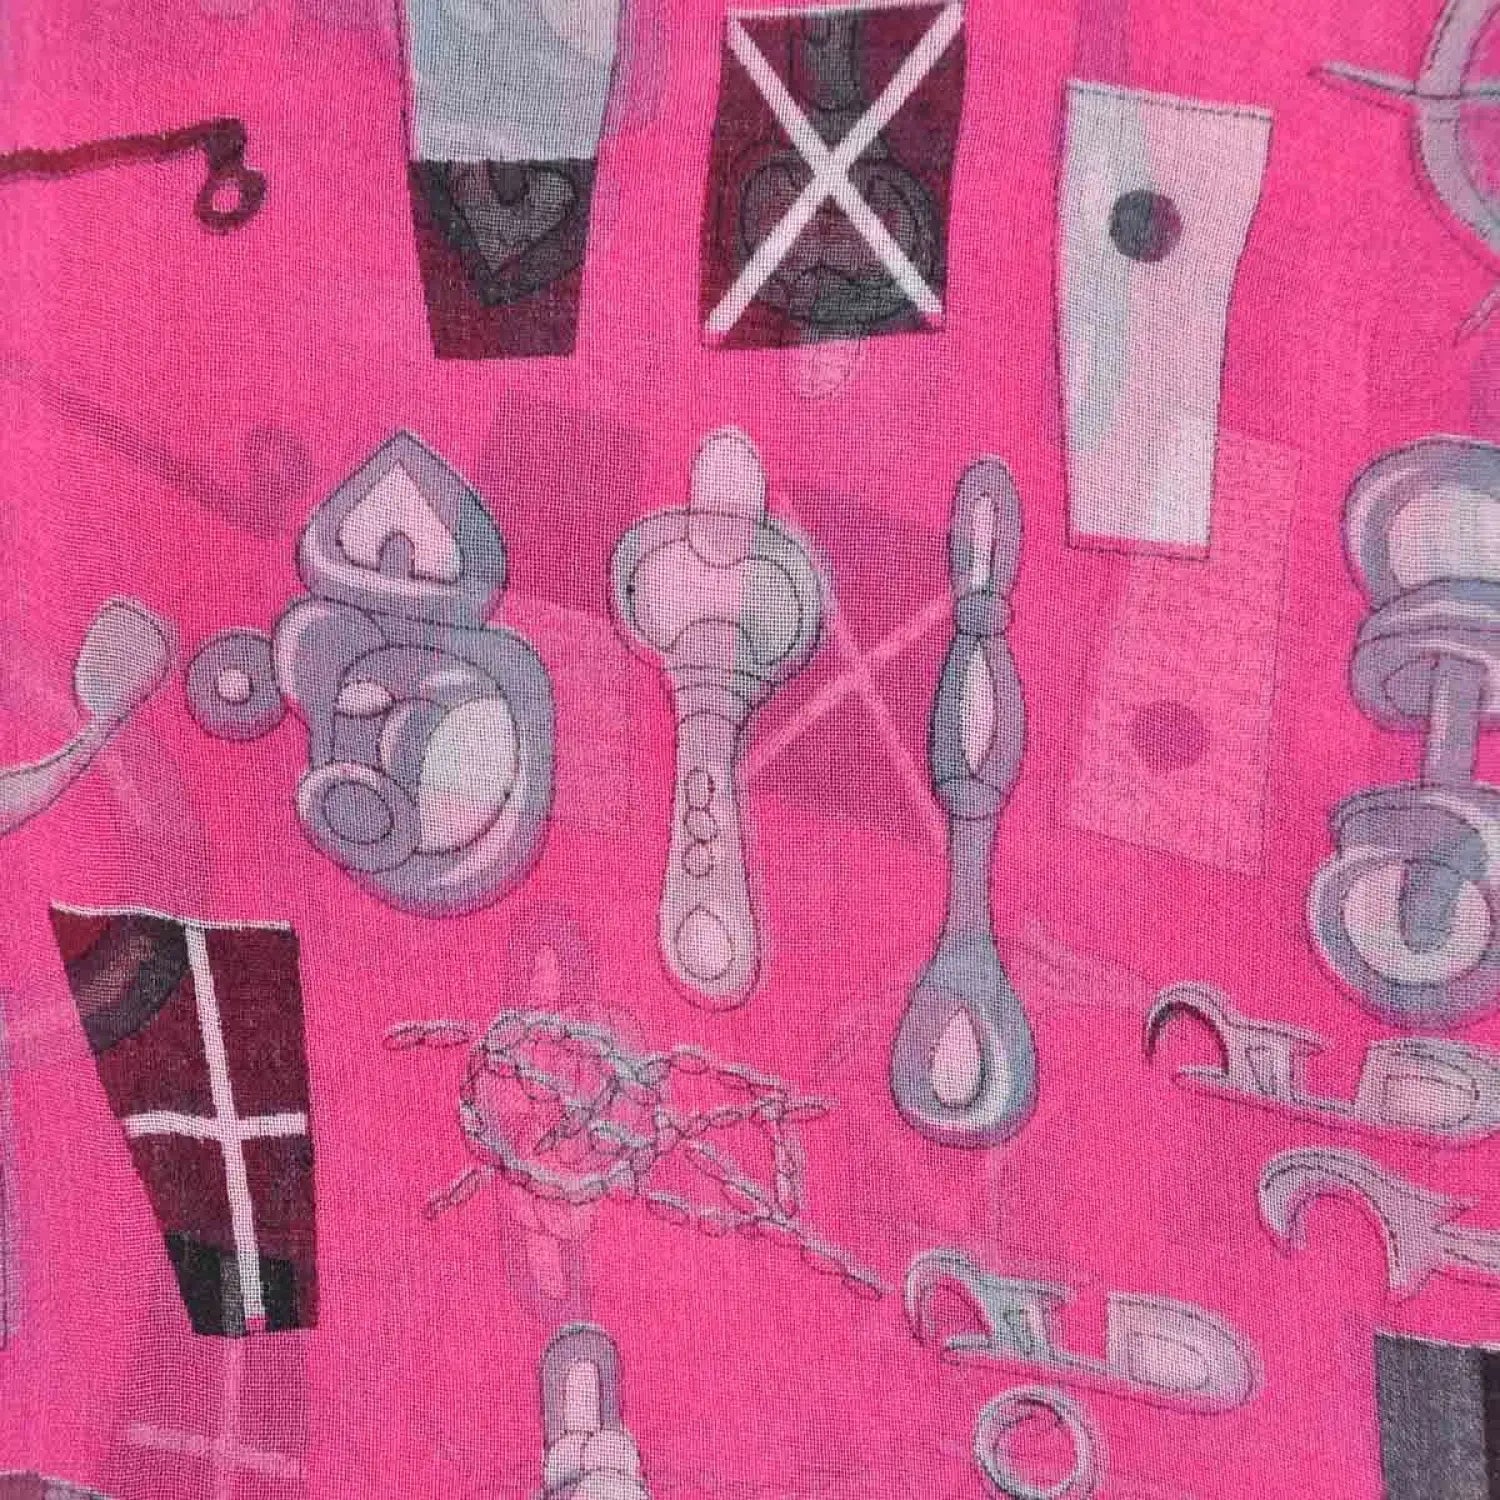 Pink silk blend summer scarf with sailor anchor design on a pink background.